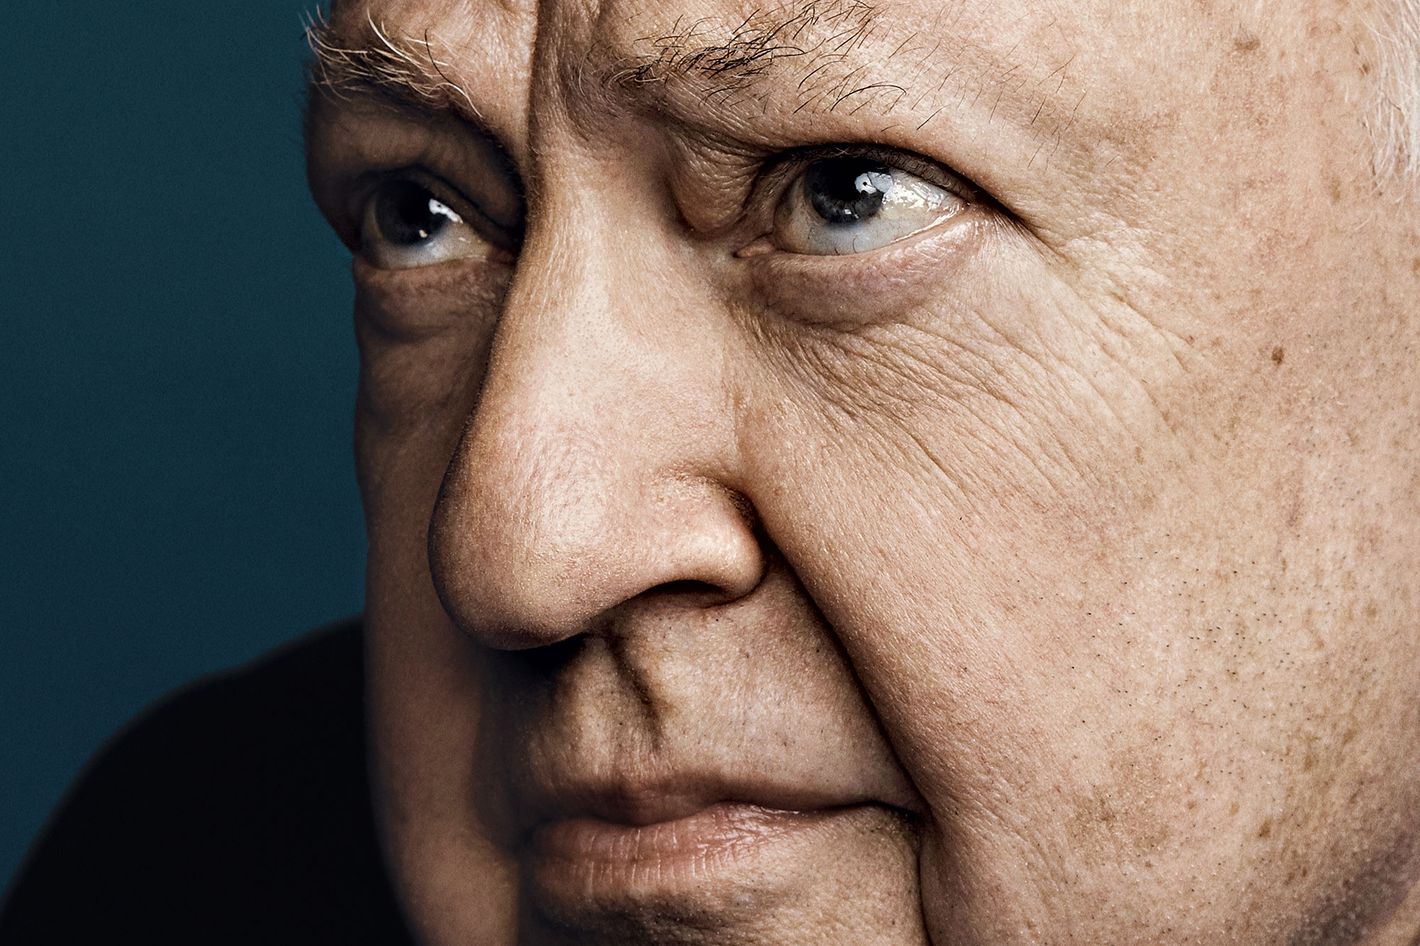 How Fox News Women Took Down Roger Ailes pic